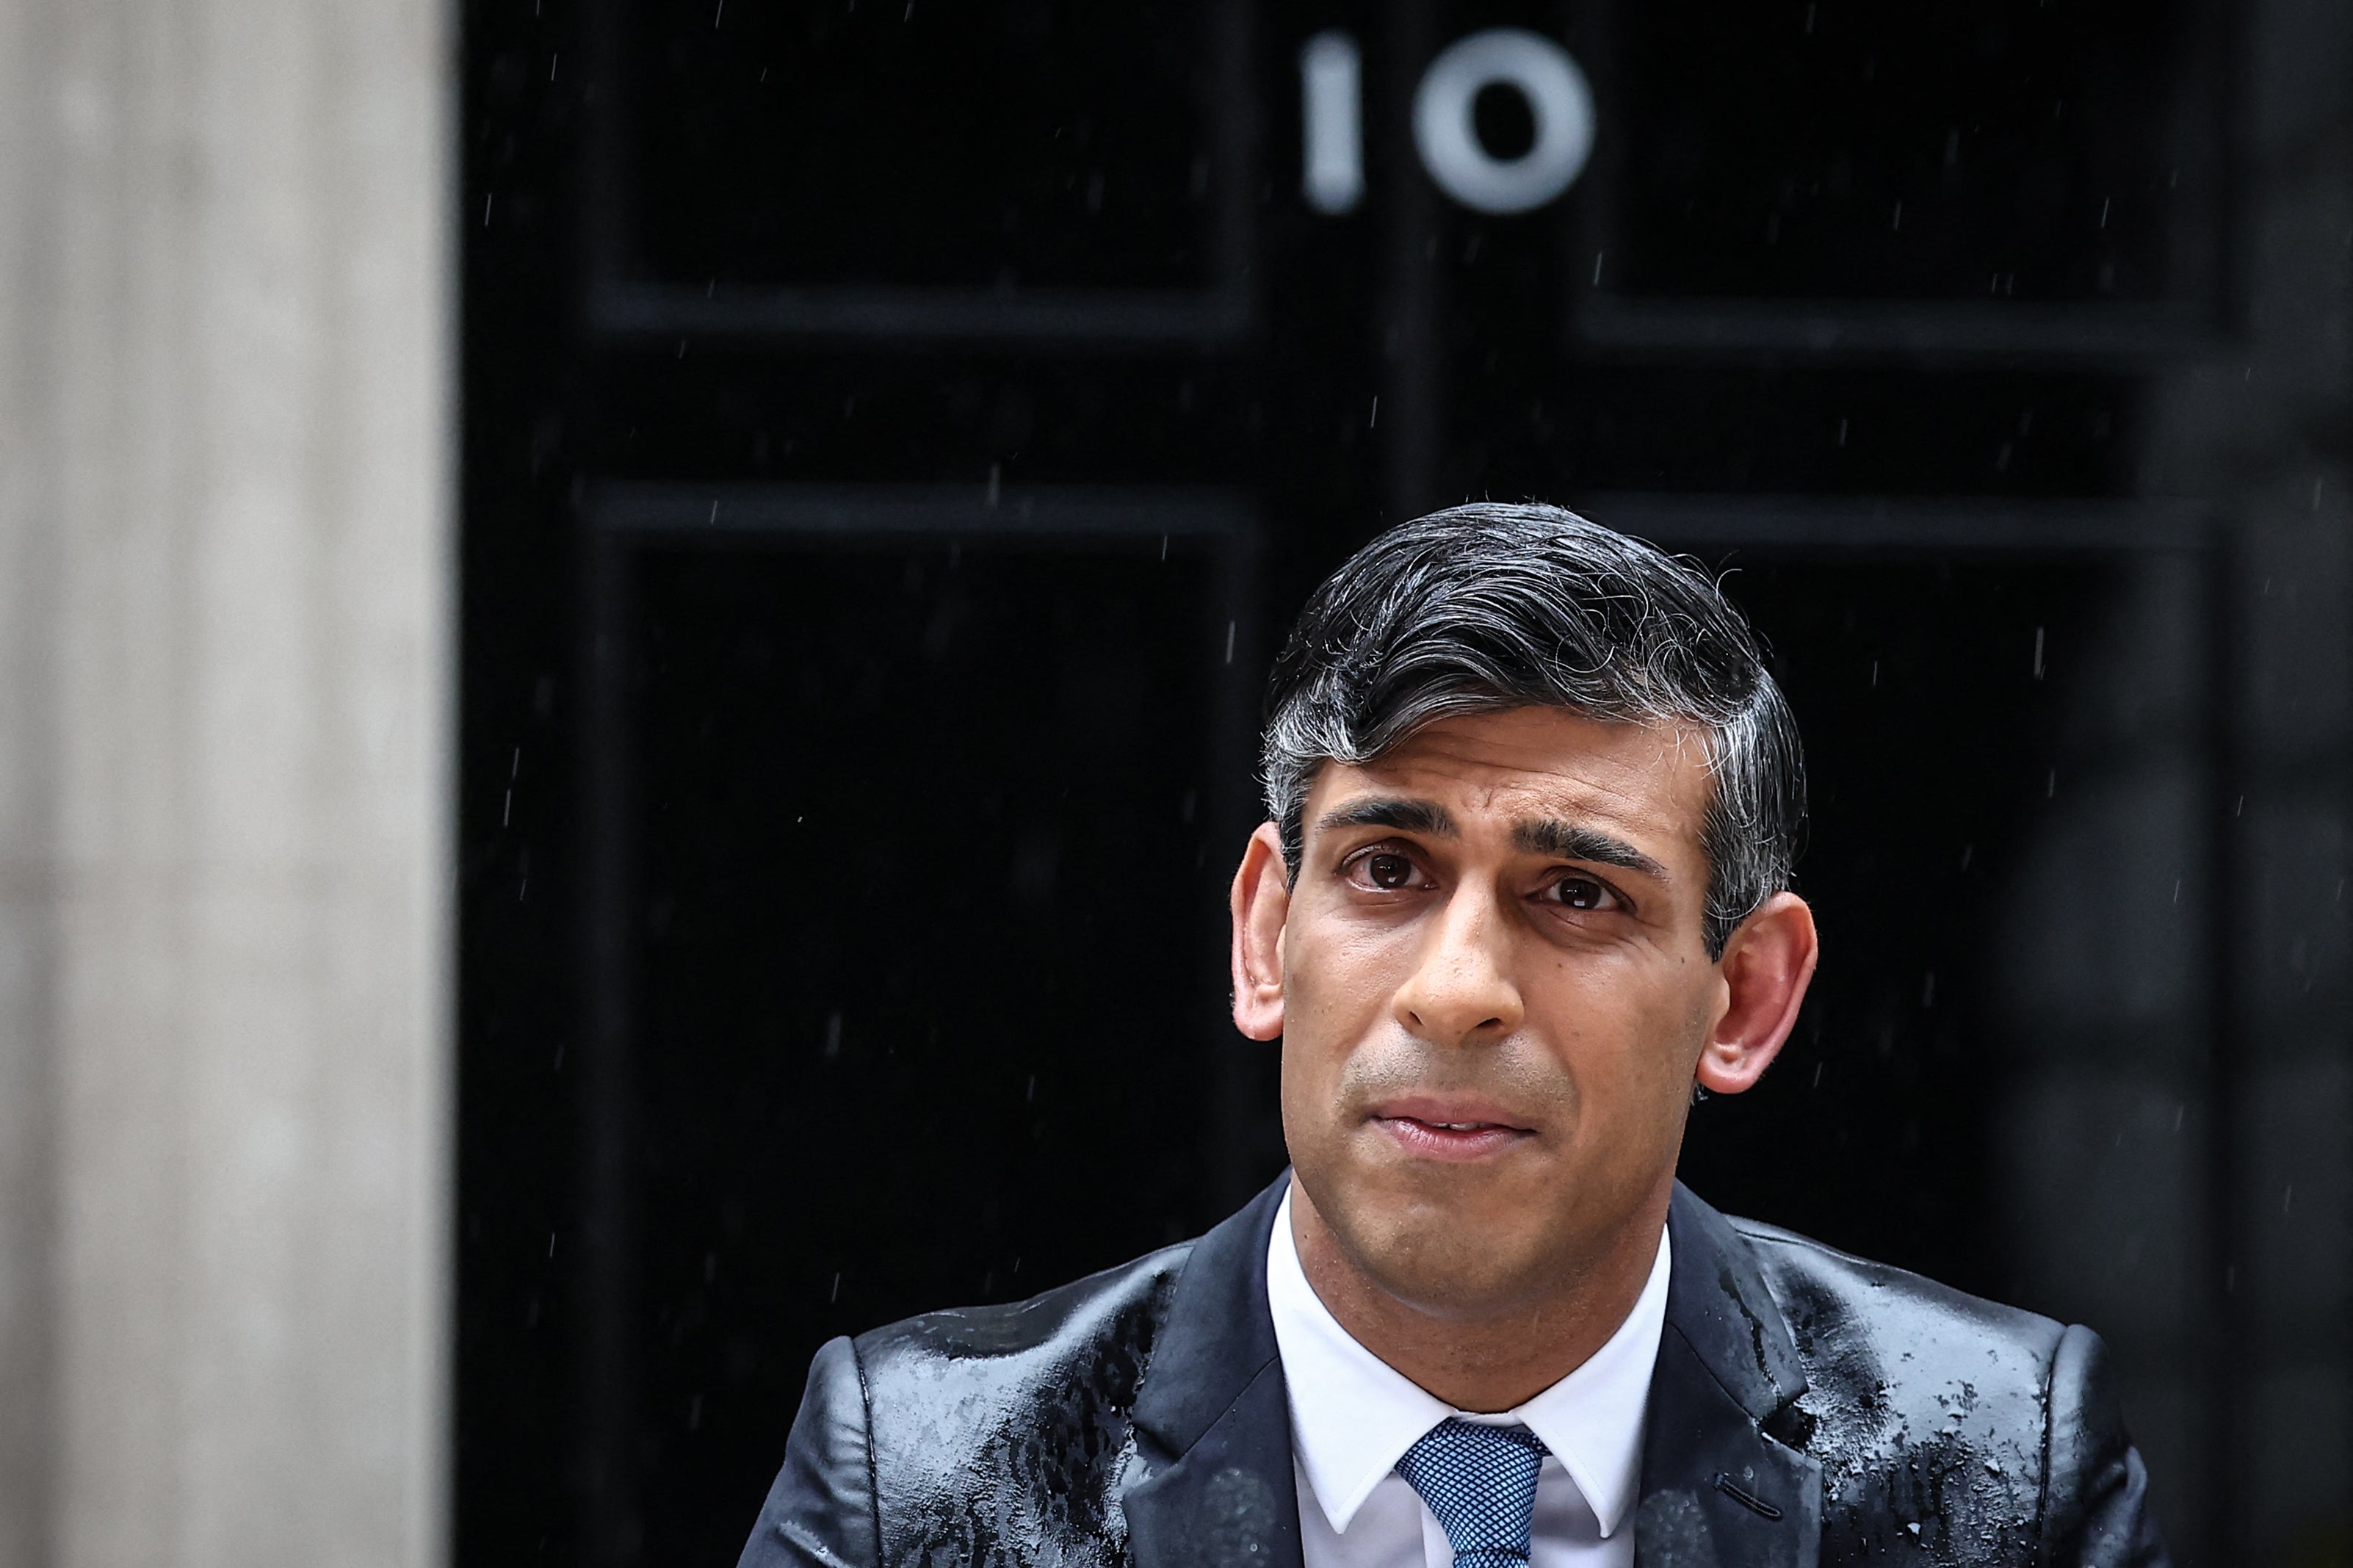 rishi sunak, brexit, laura kuenssberg, conservative, prime minister, nigel farage, diane abbott, labour, rishi sunak says he is proud of disastrous election campaign - and claims he will win